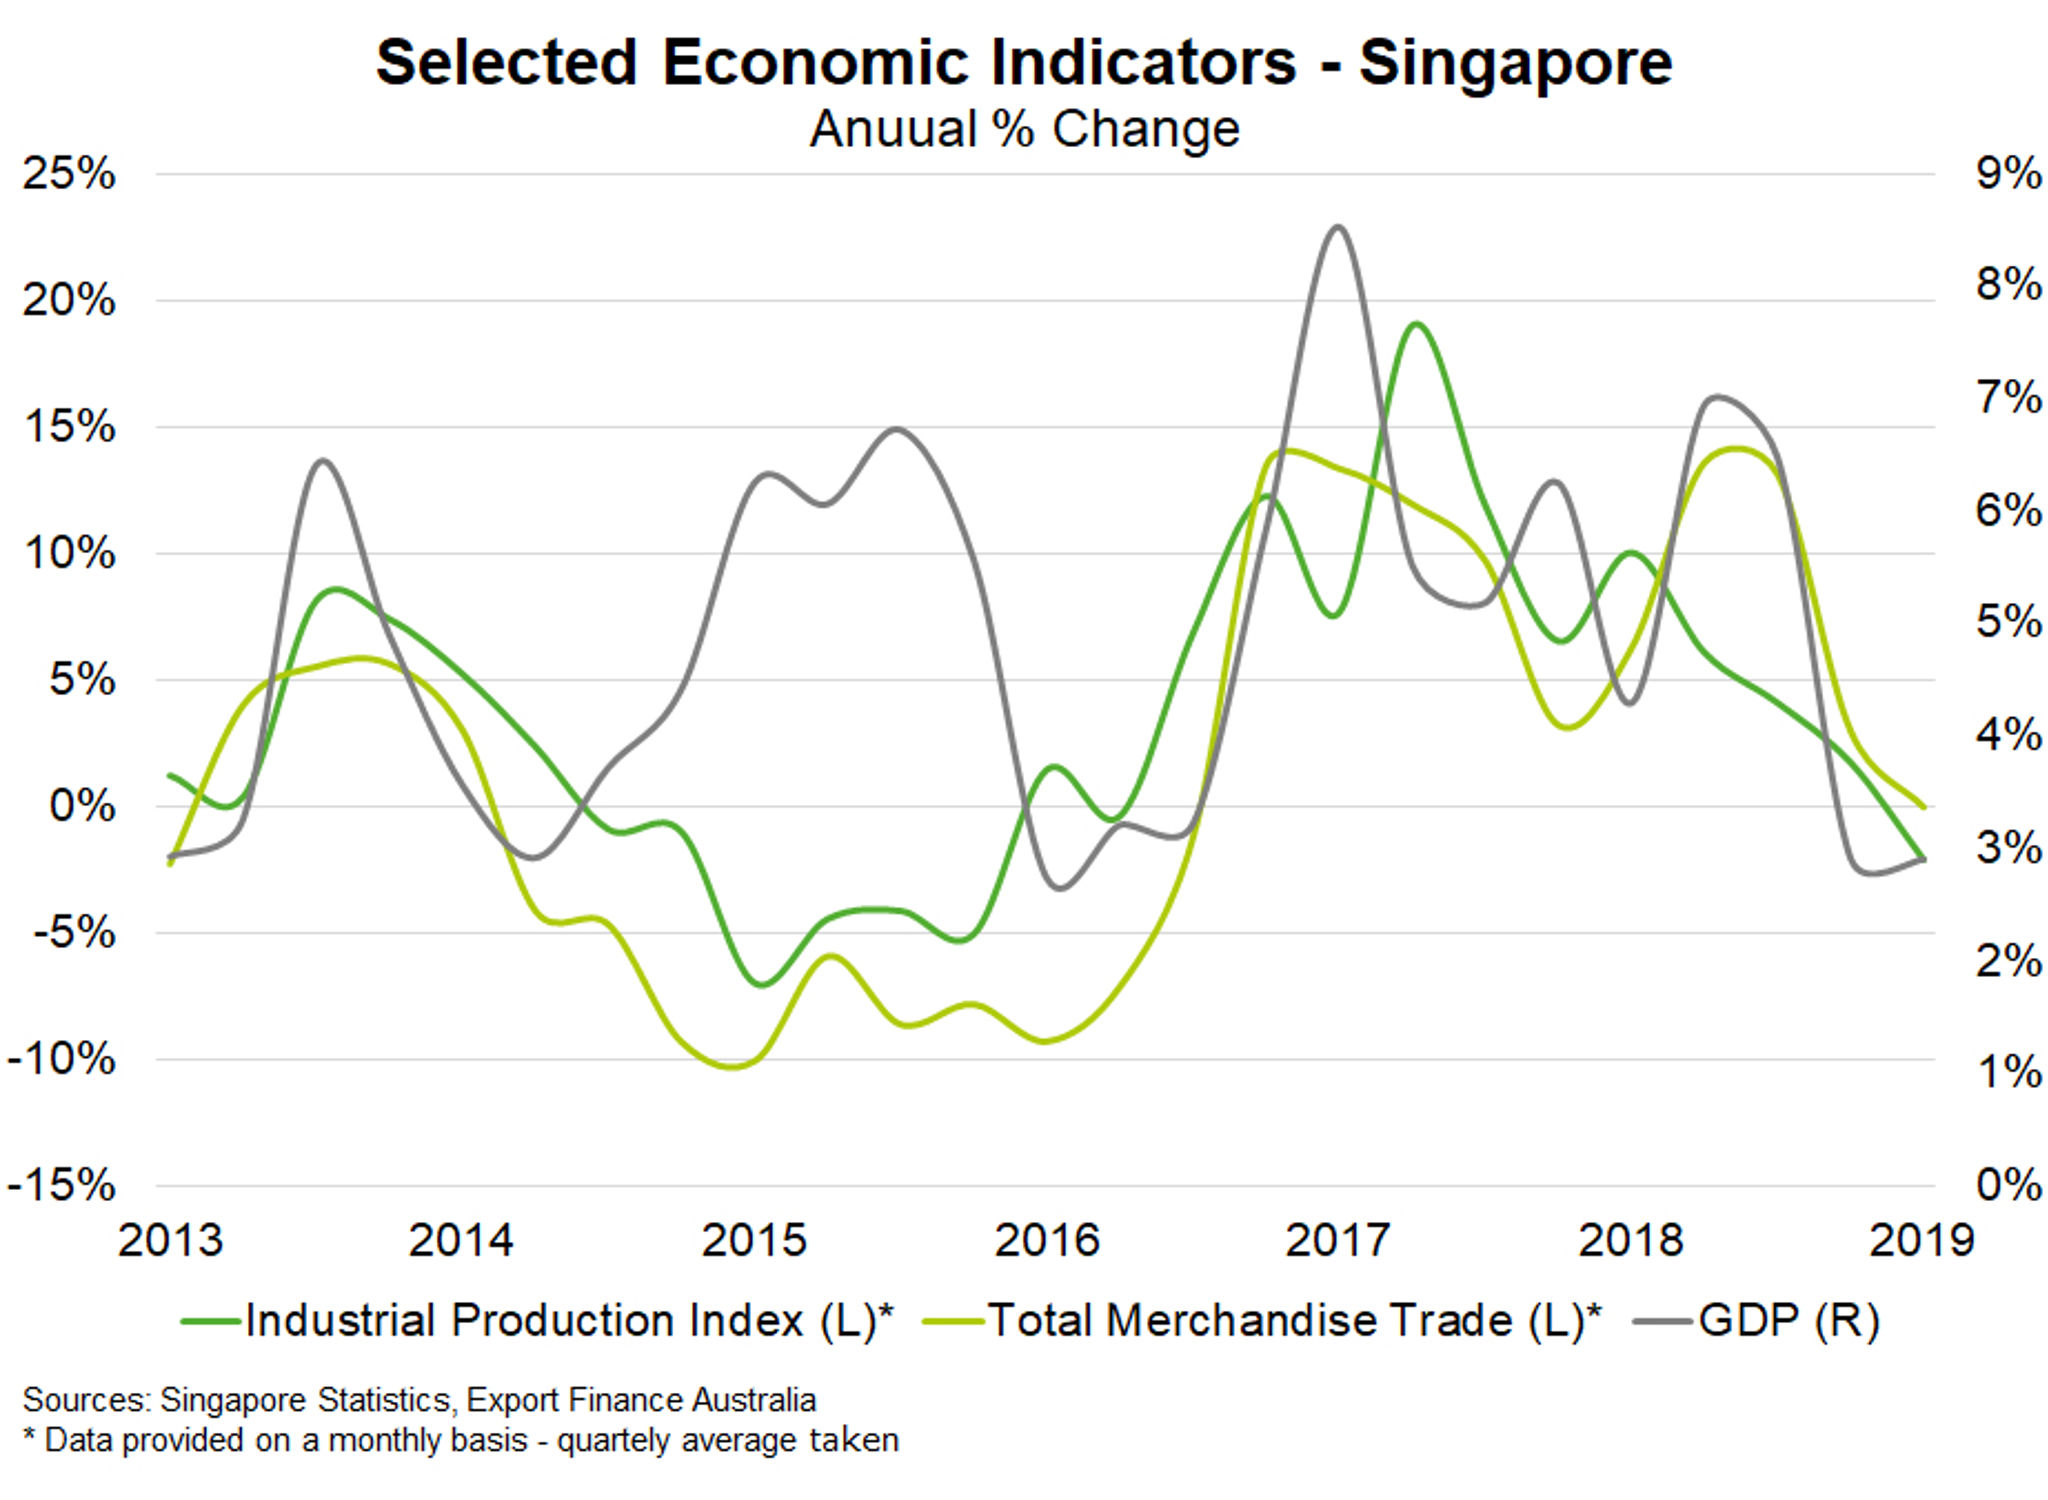 Singapore—Supply chains hurt by trade dispute